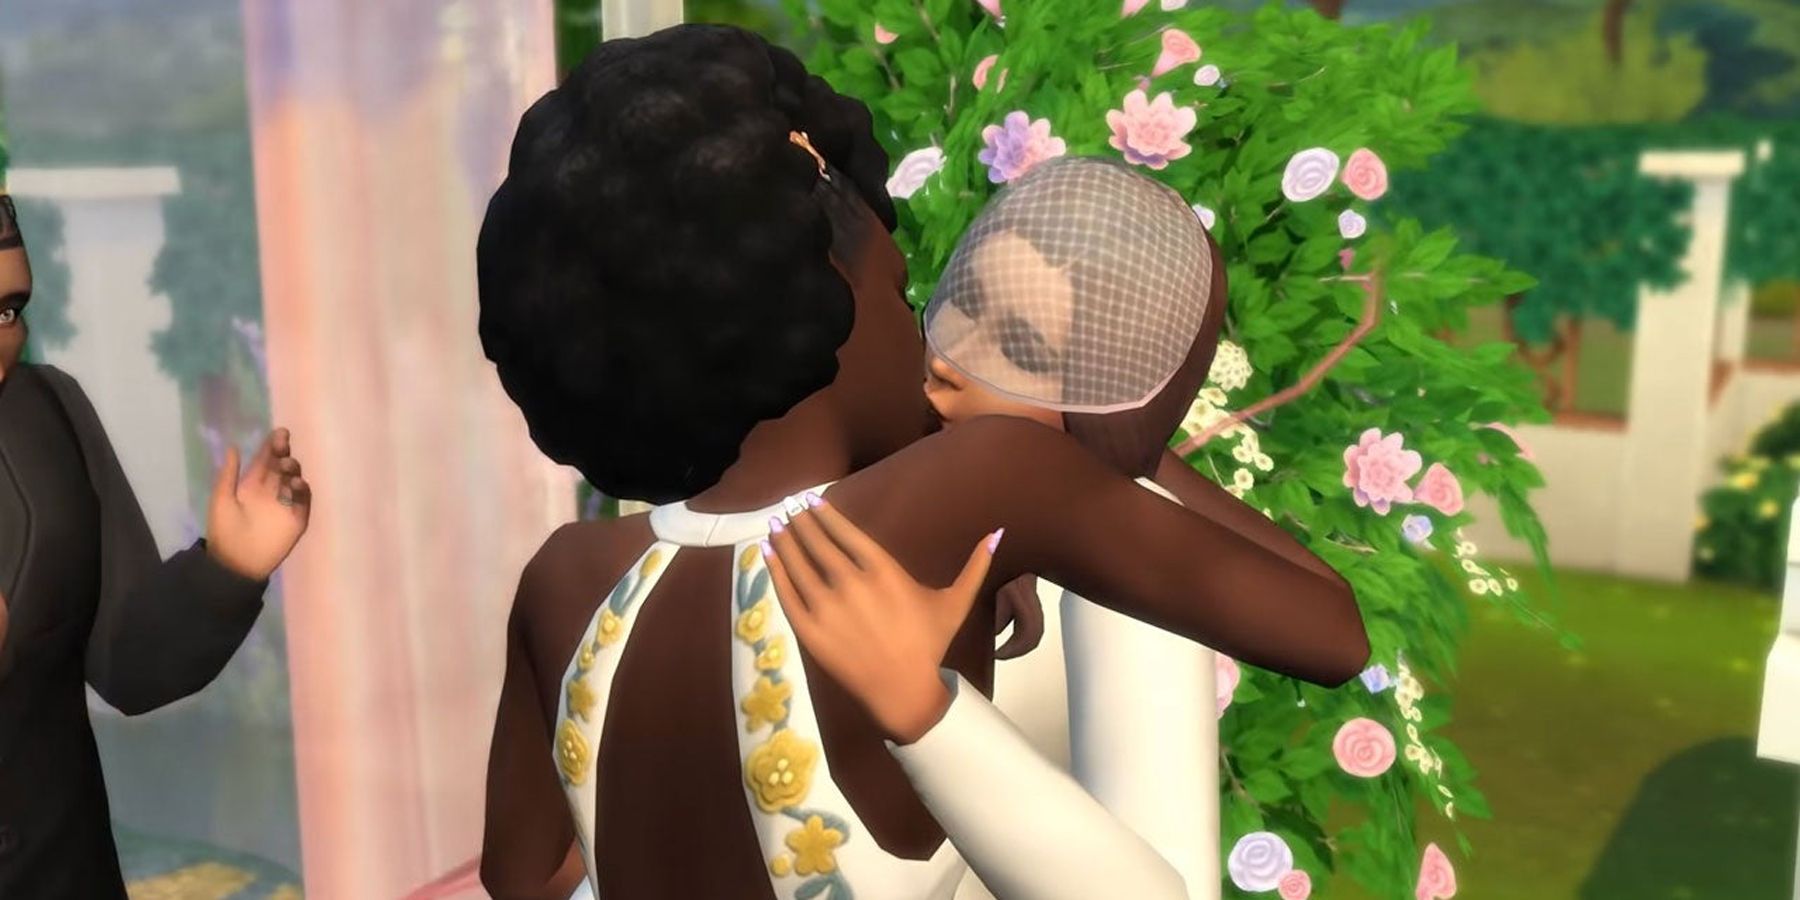 The Sims 4 My Wedding Stories Dominique and Camille kissing